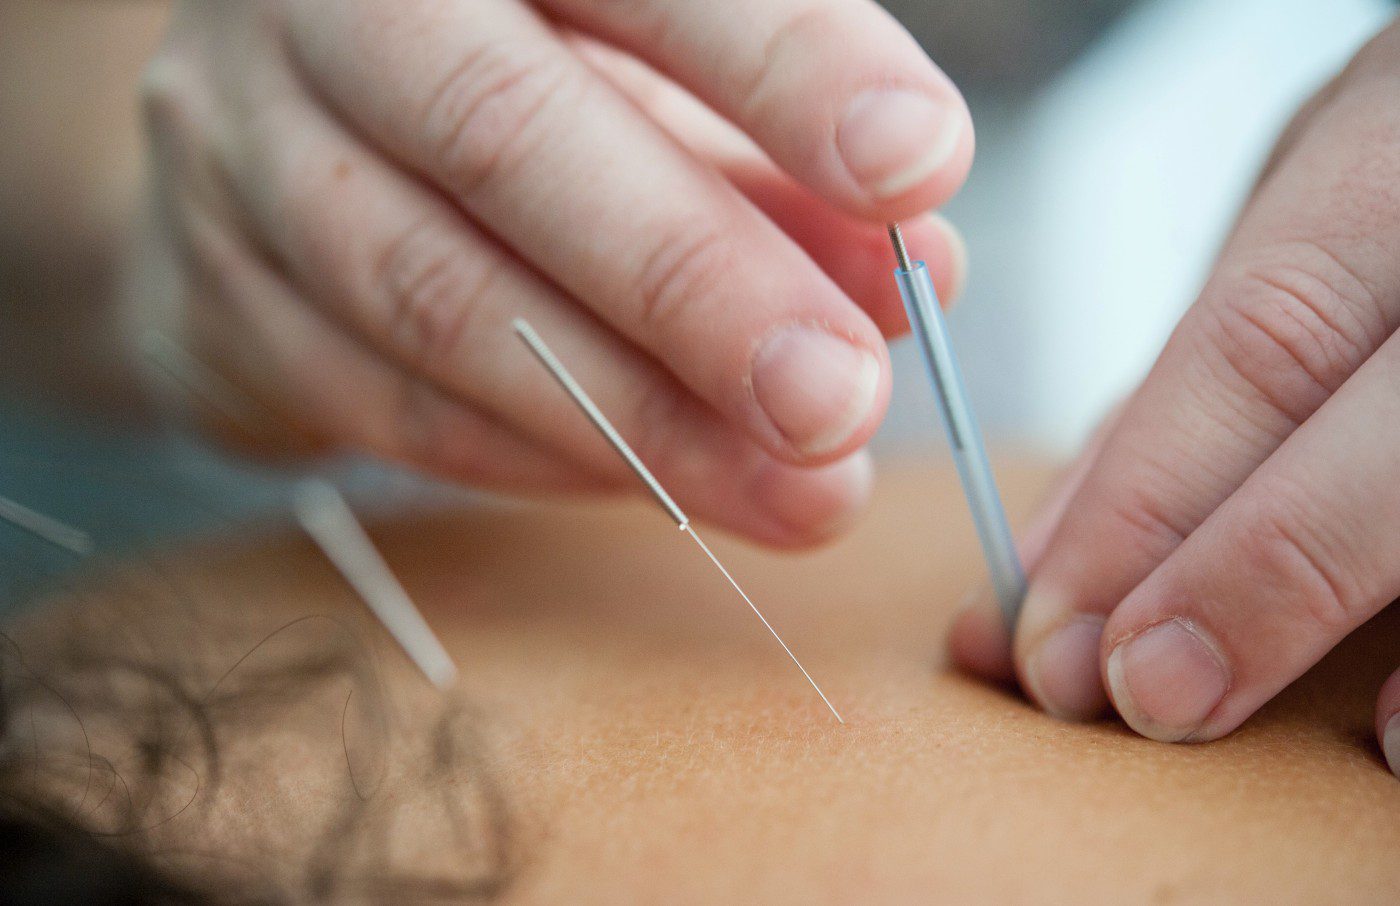 Needling with guide tube